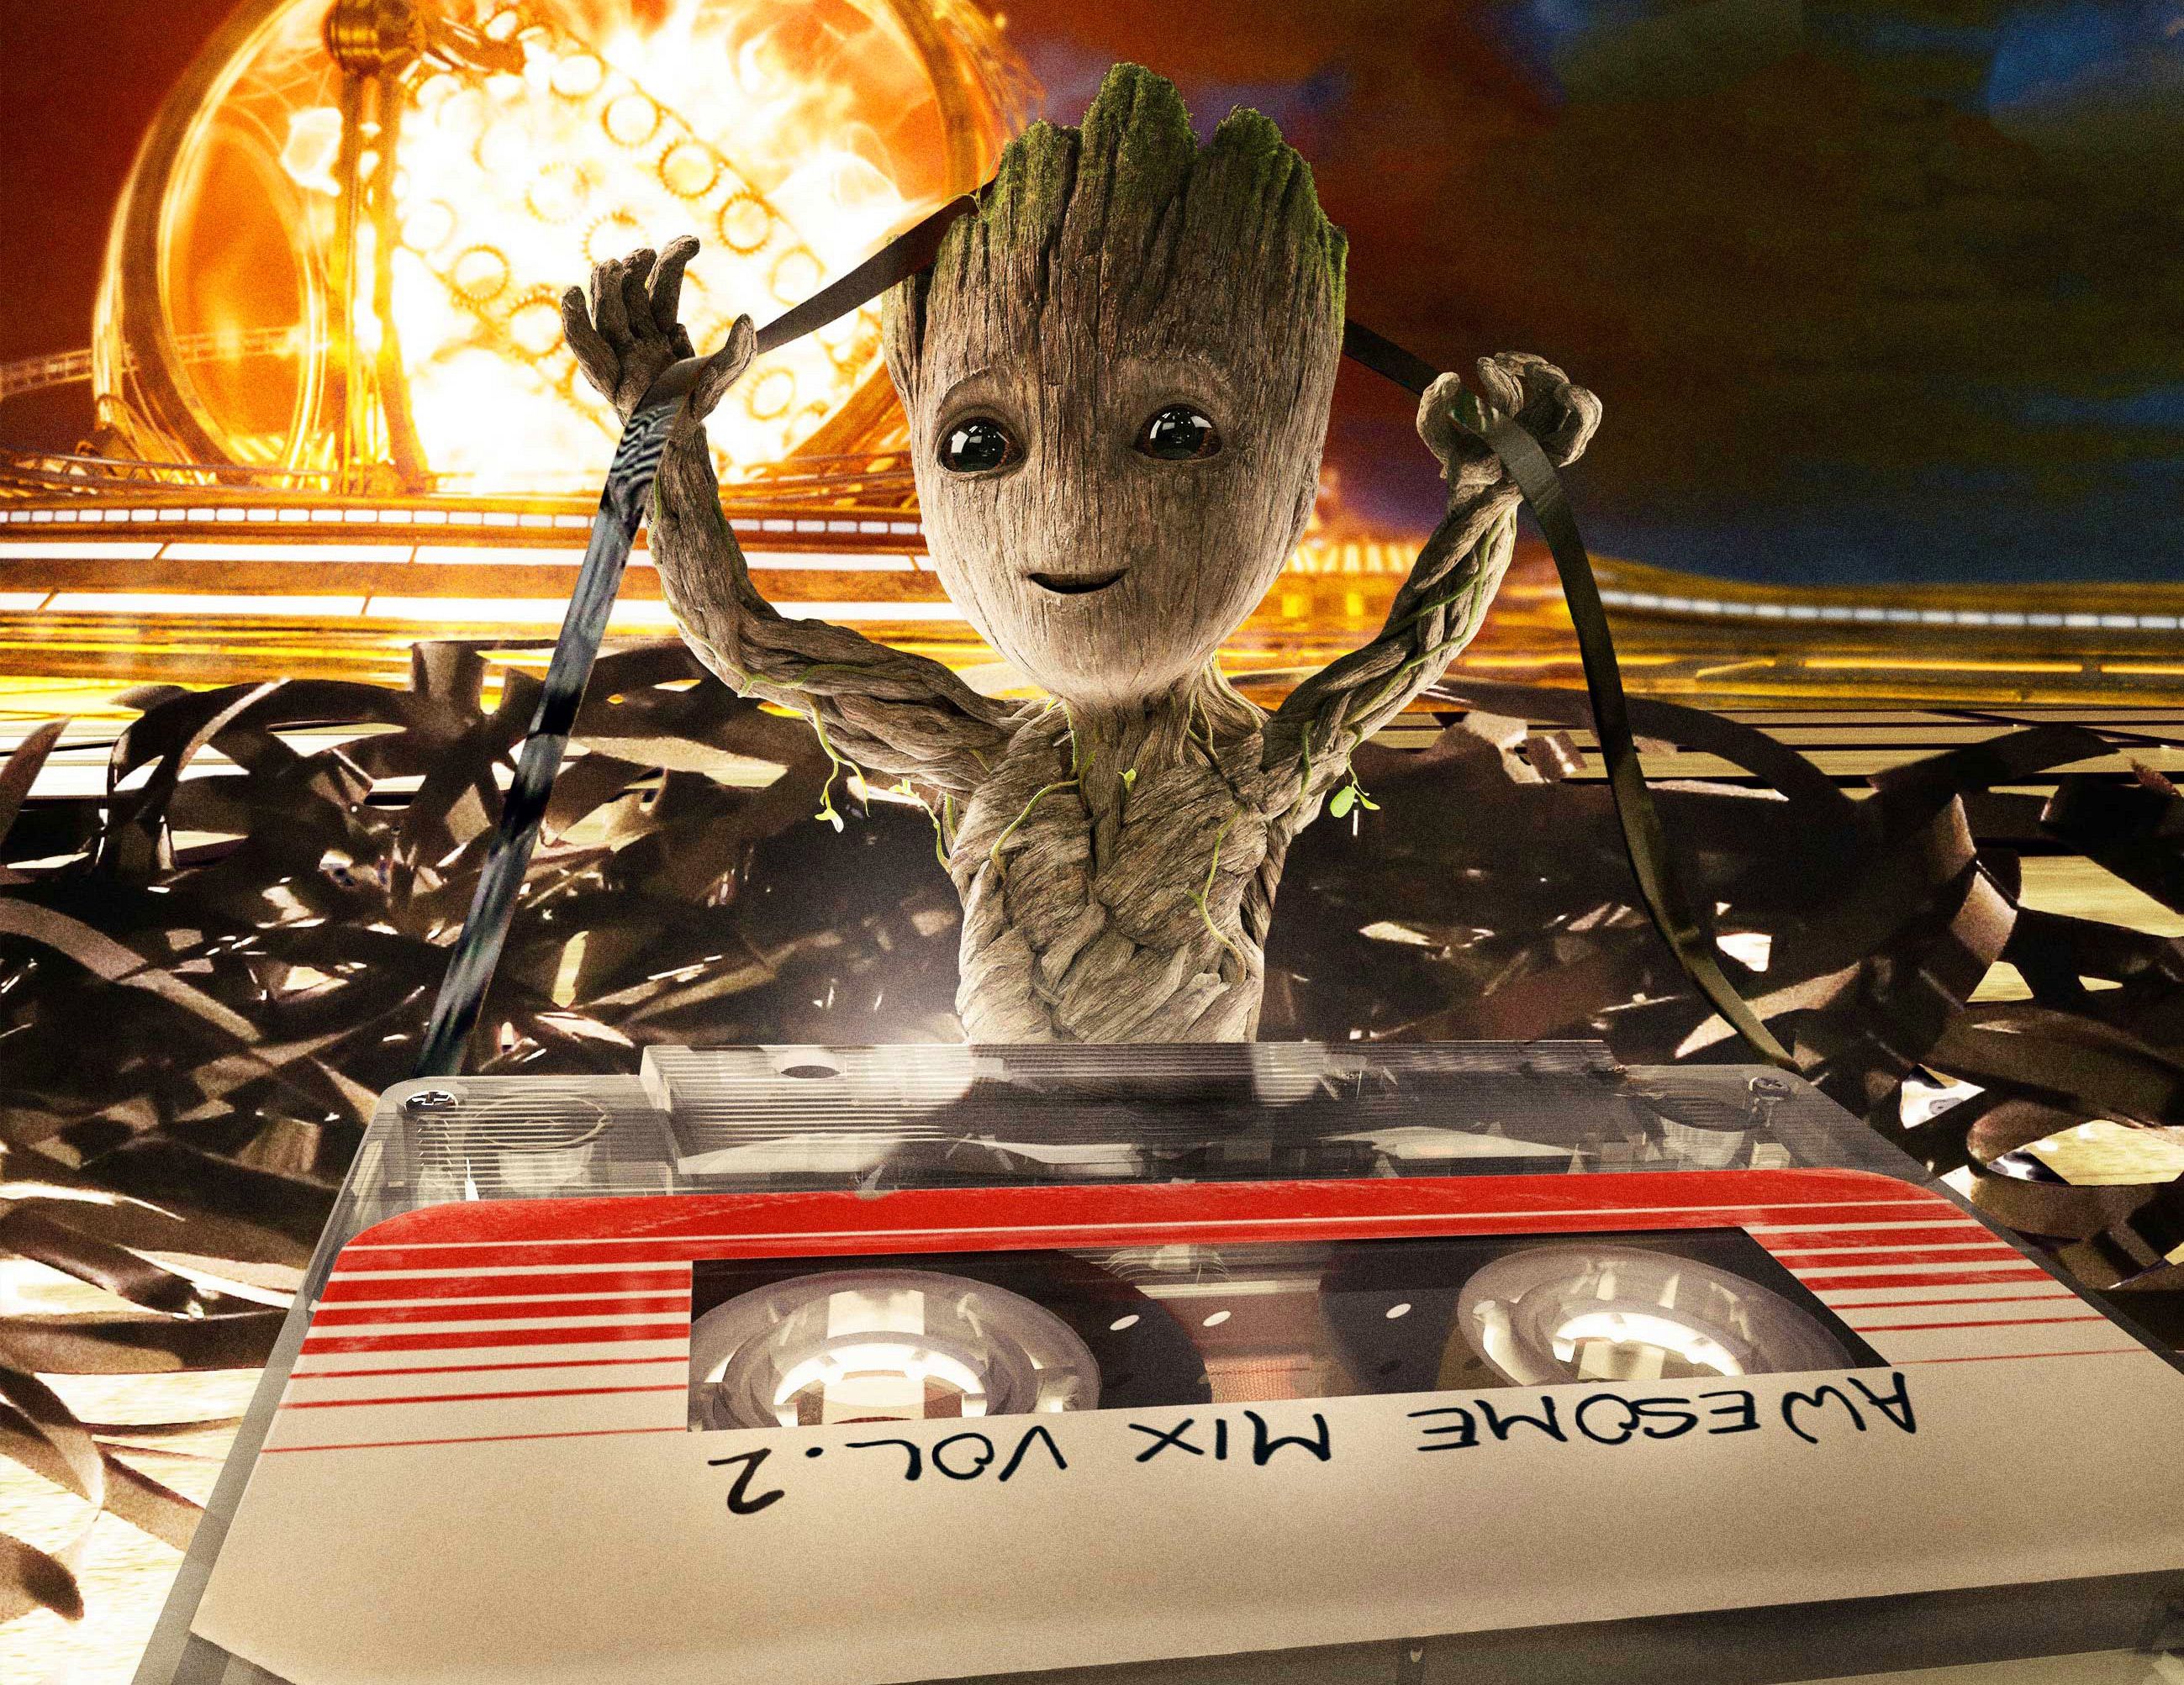 groot the groot guardians of the galaxy wallpaper